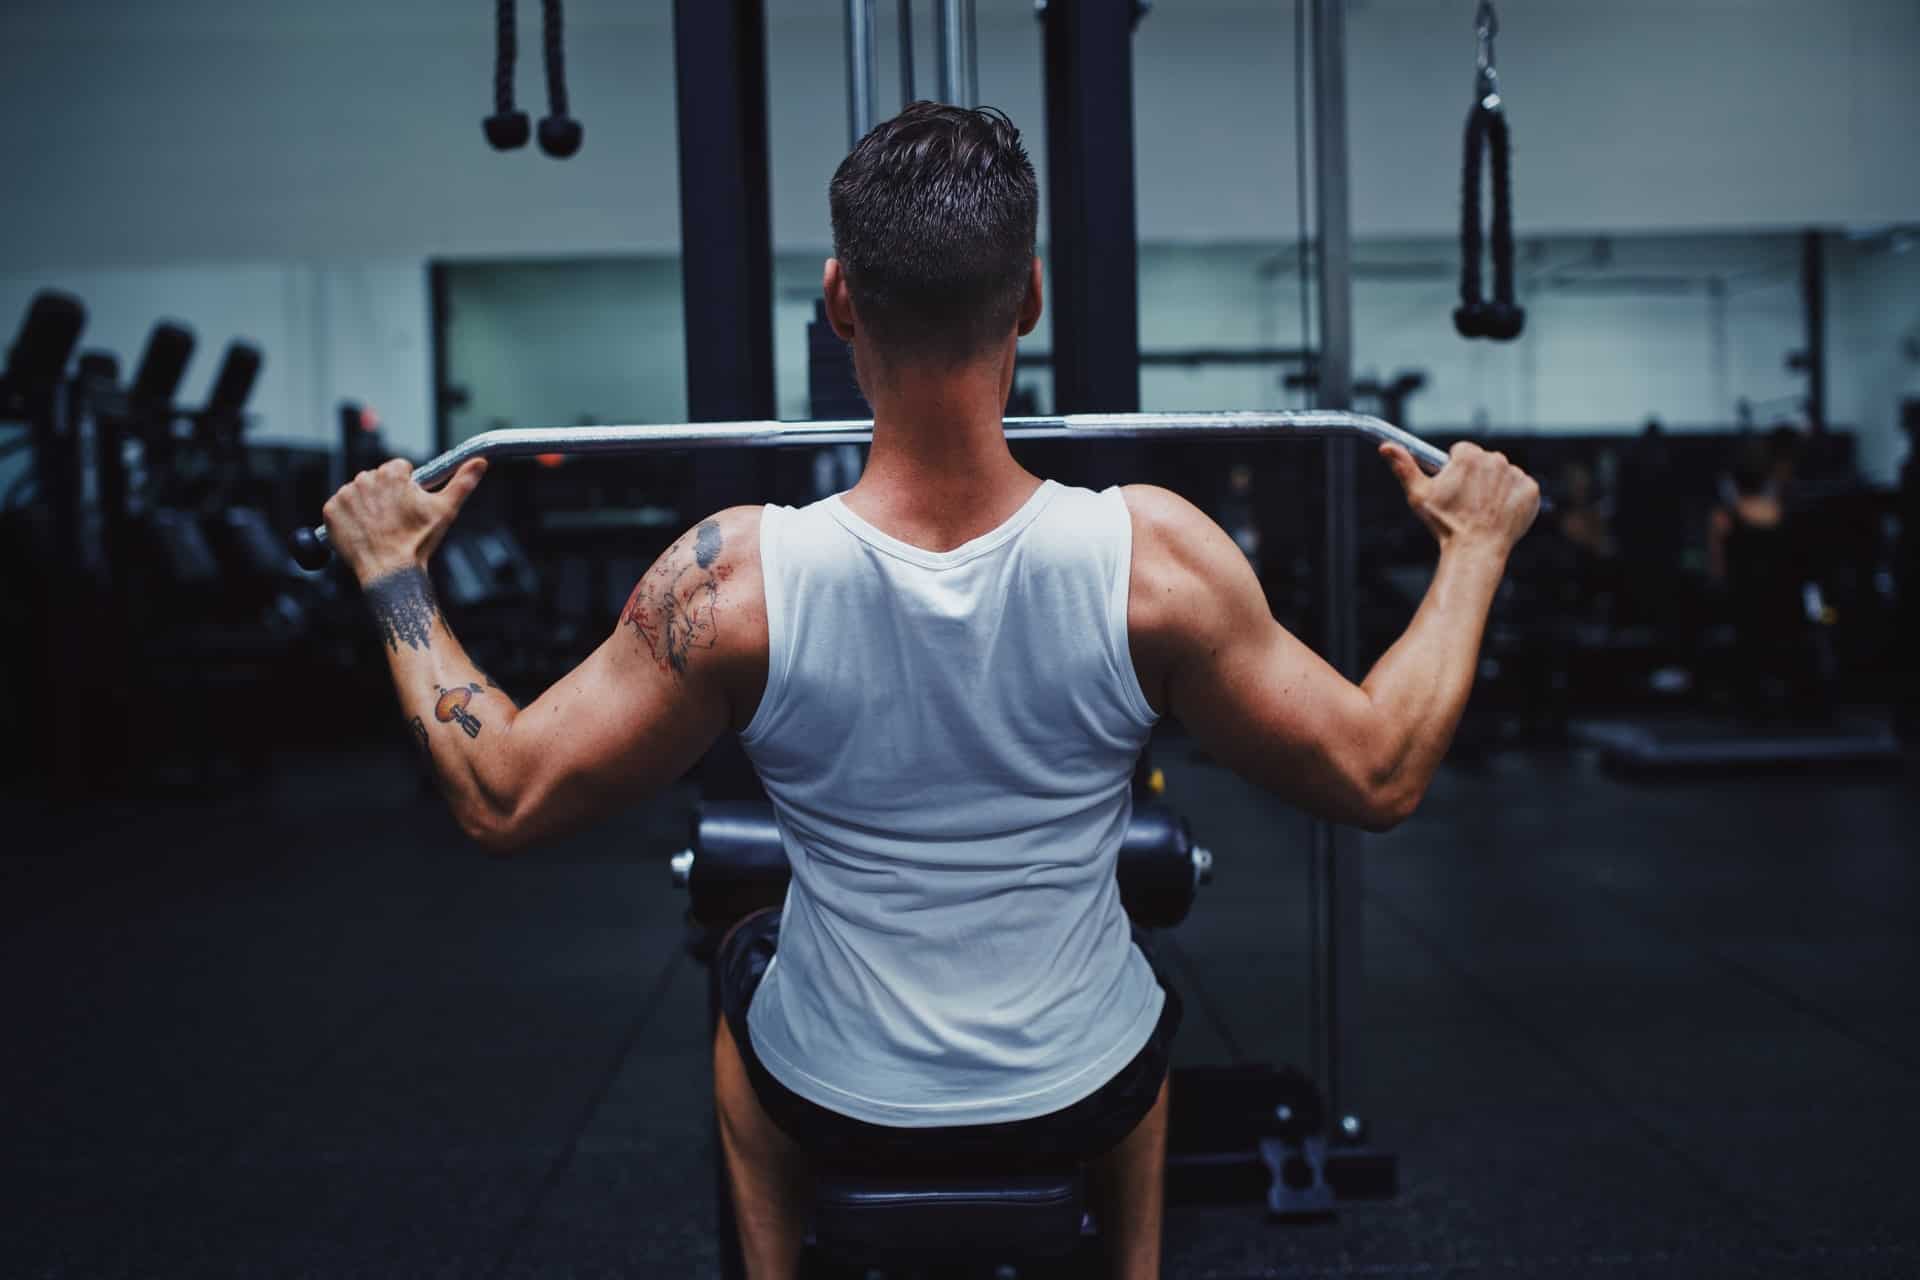 What Happens to Tattoos When You Gain Muscle? - InkedMind